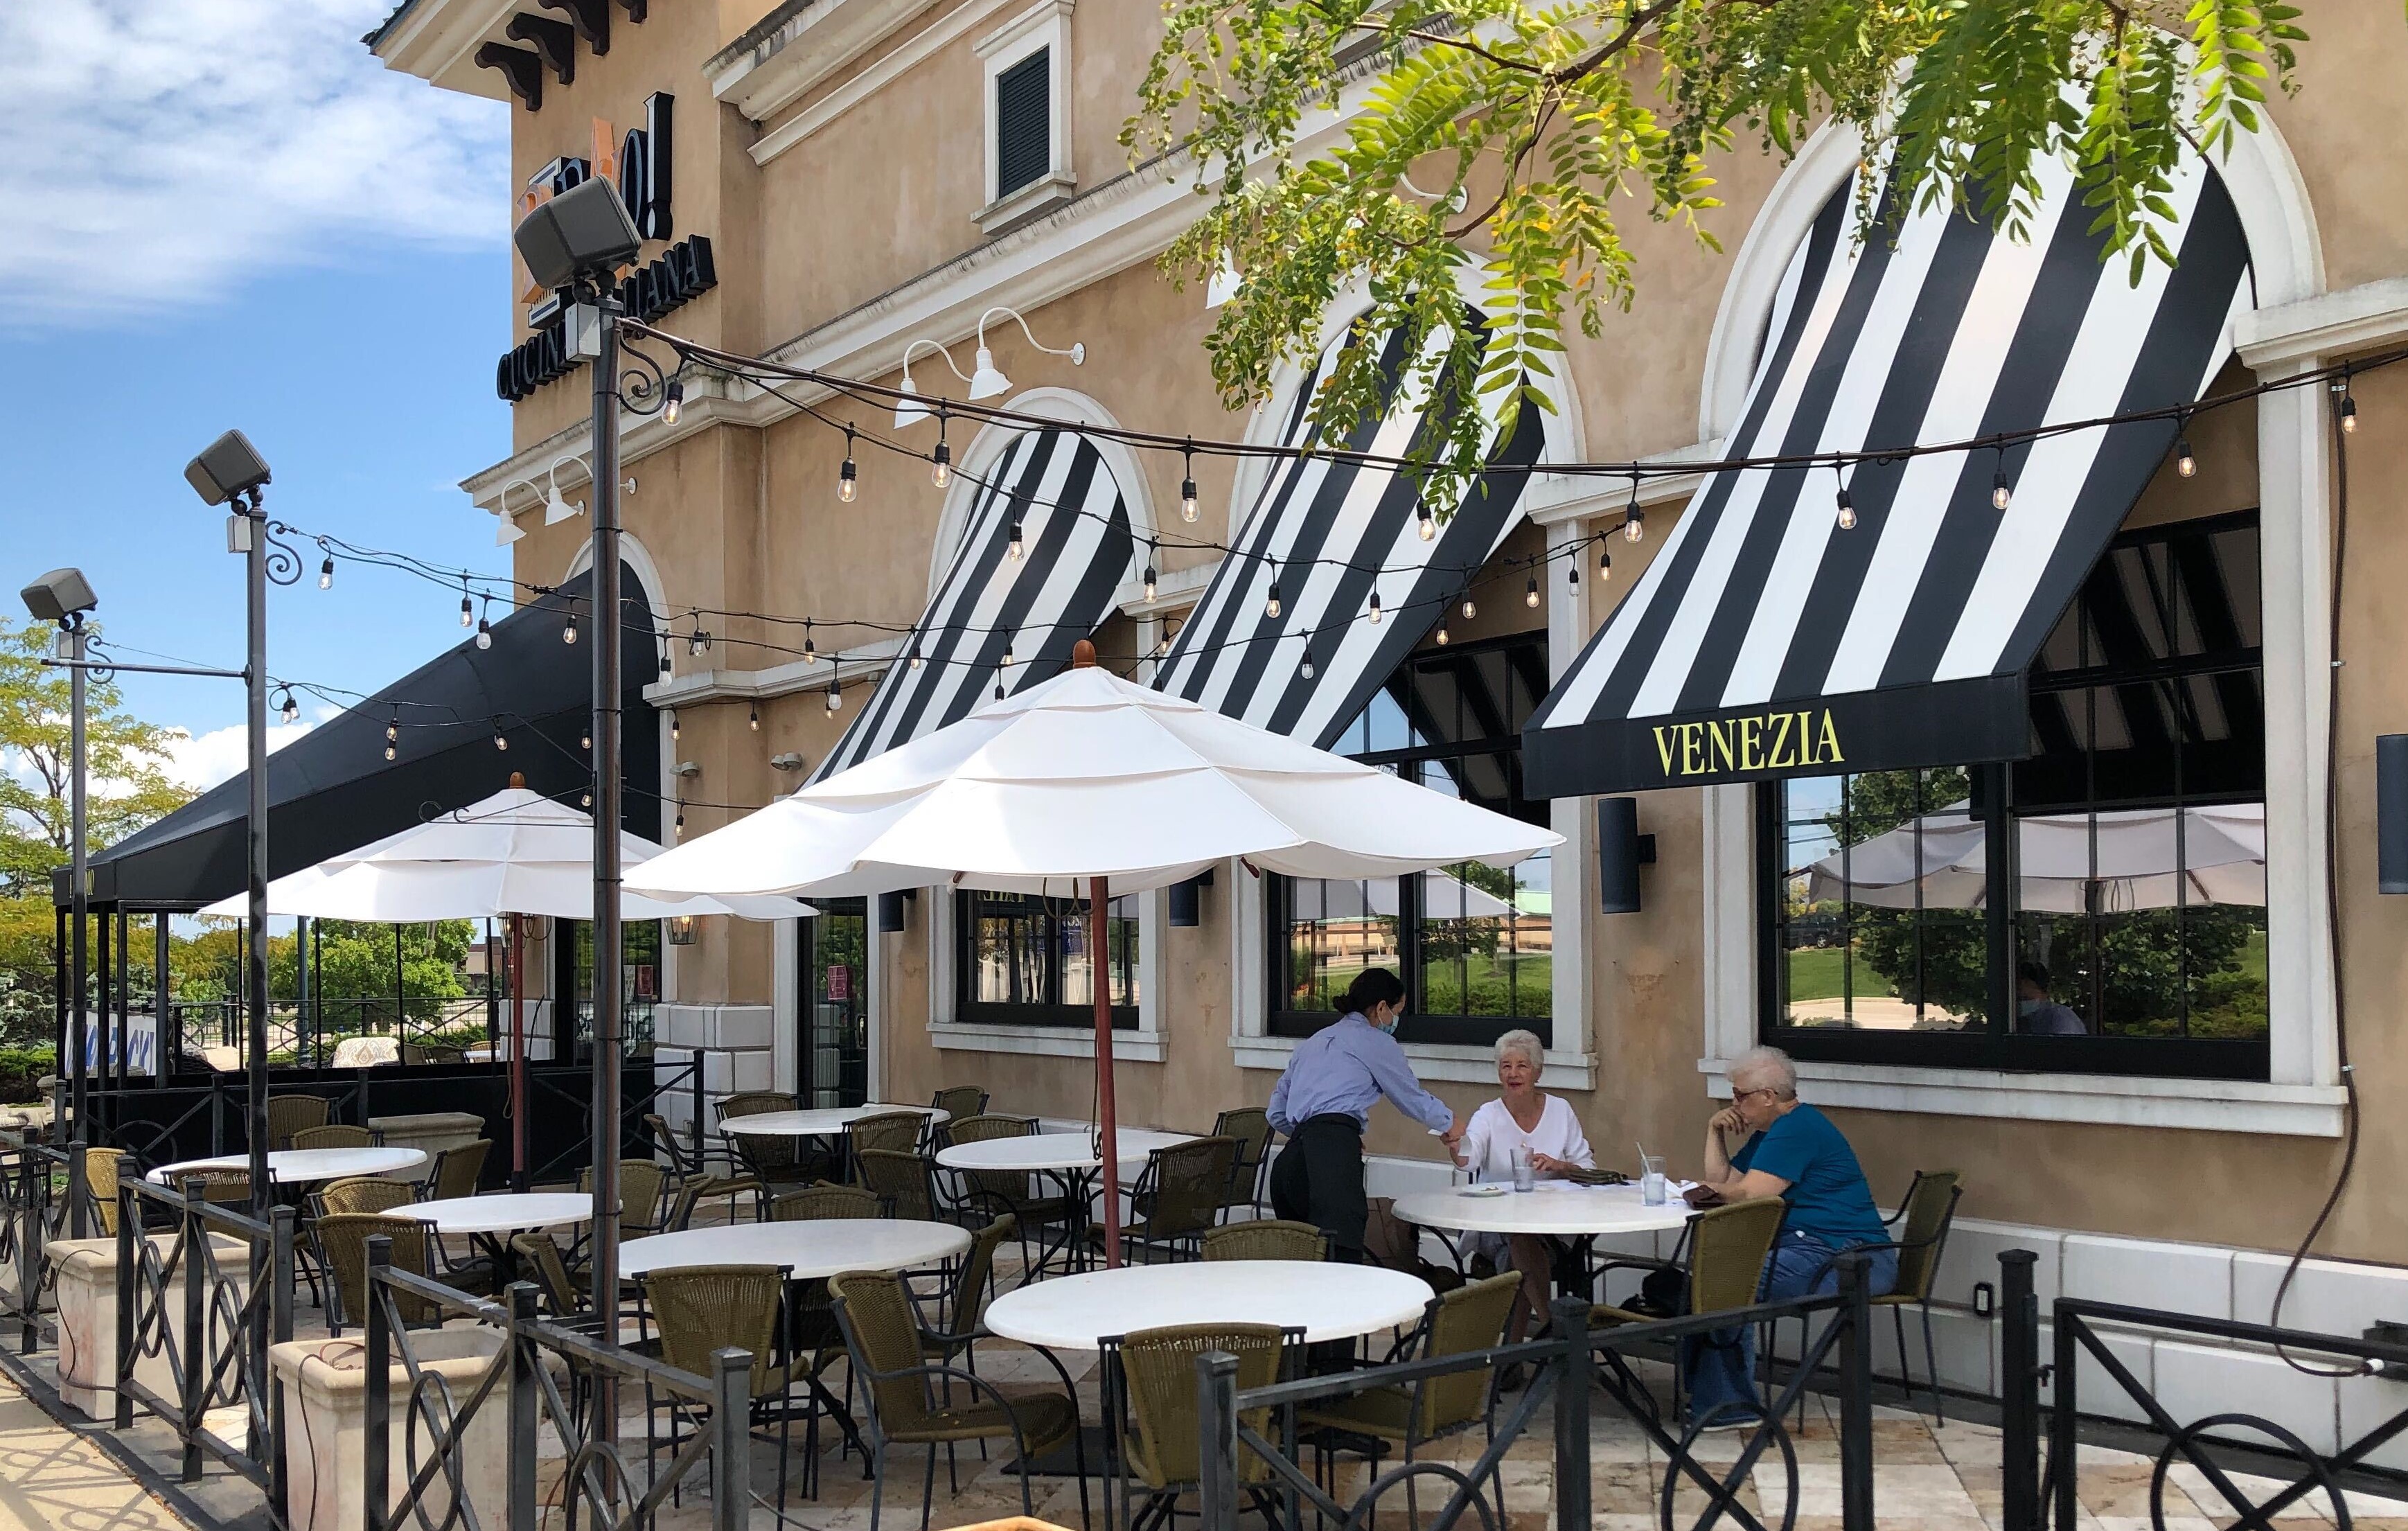 New owner of Bravo, Brio Italian restaurants touts patio works to Fairfield Commons location as chains emerge from bankruptcy